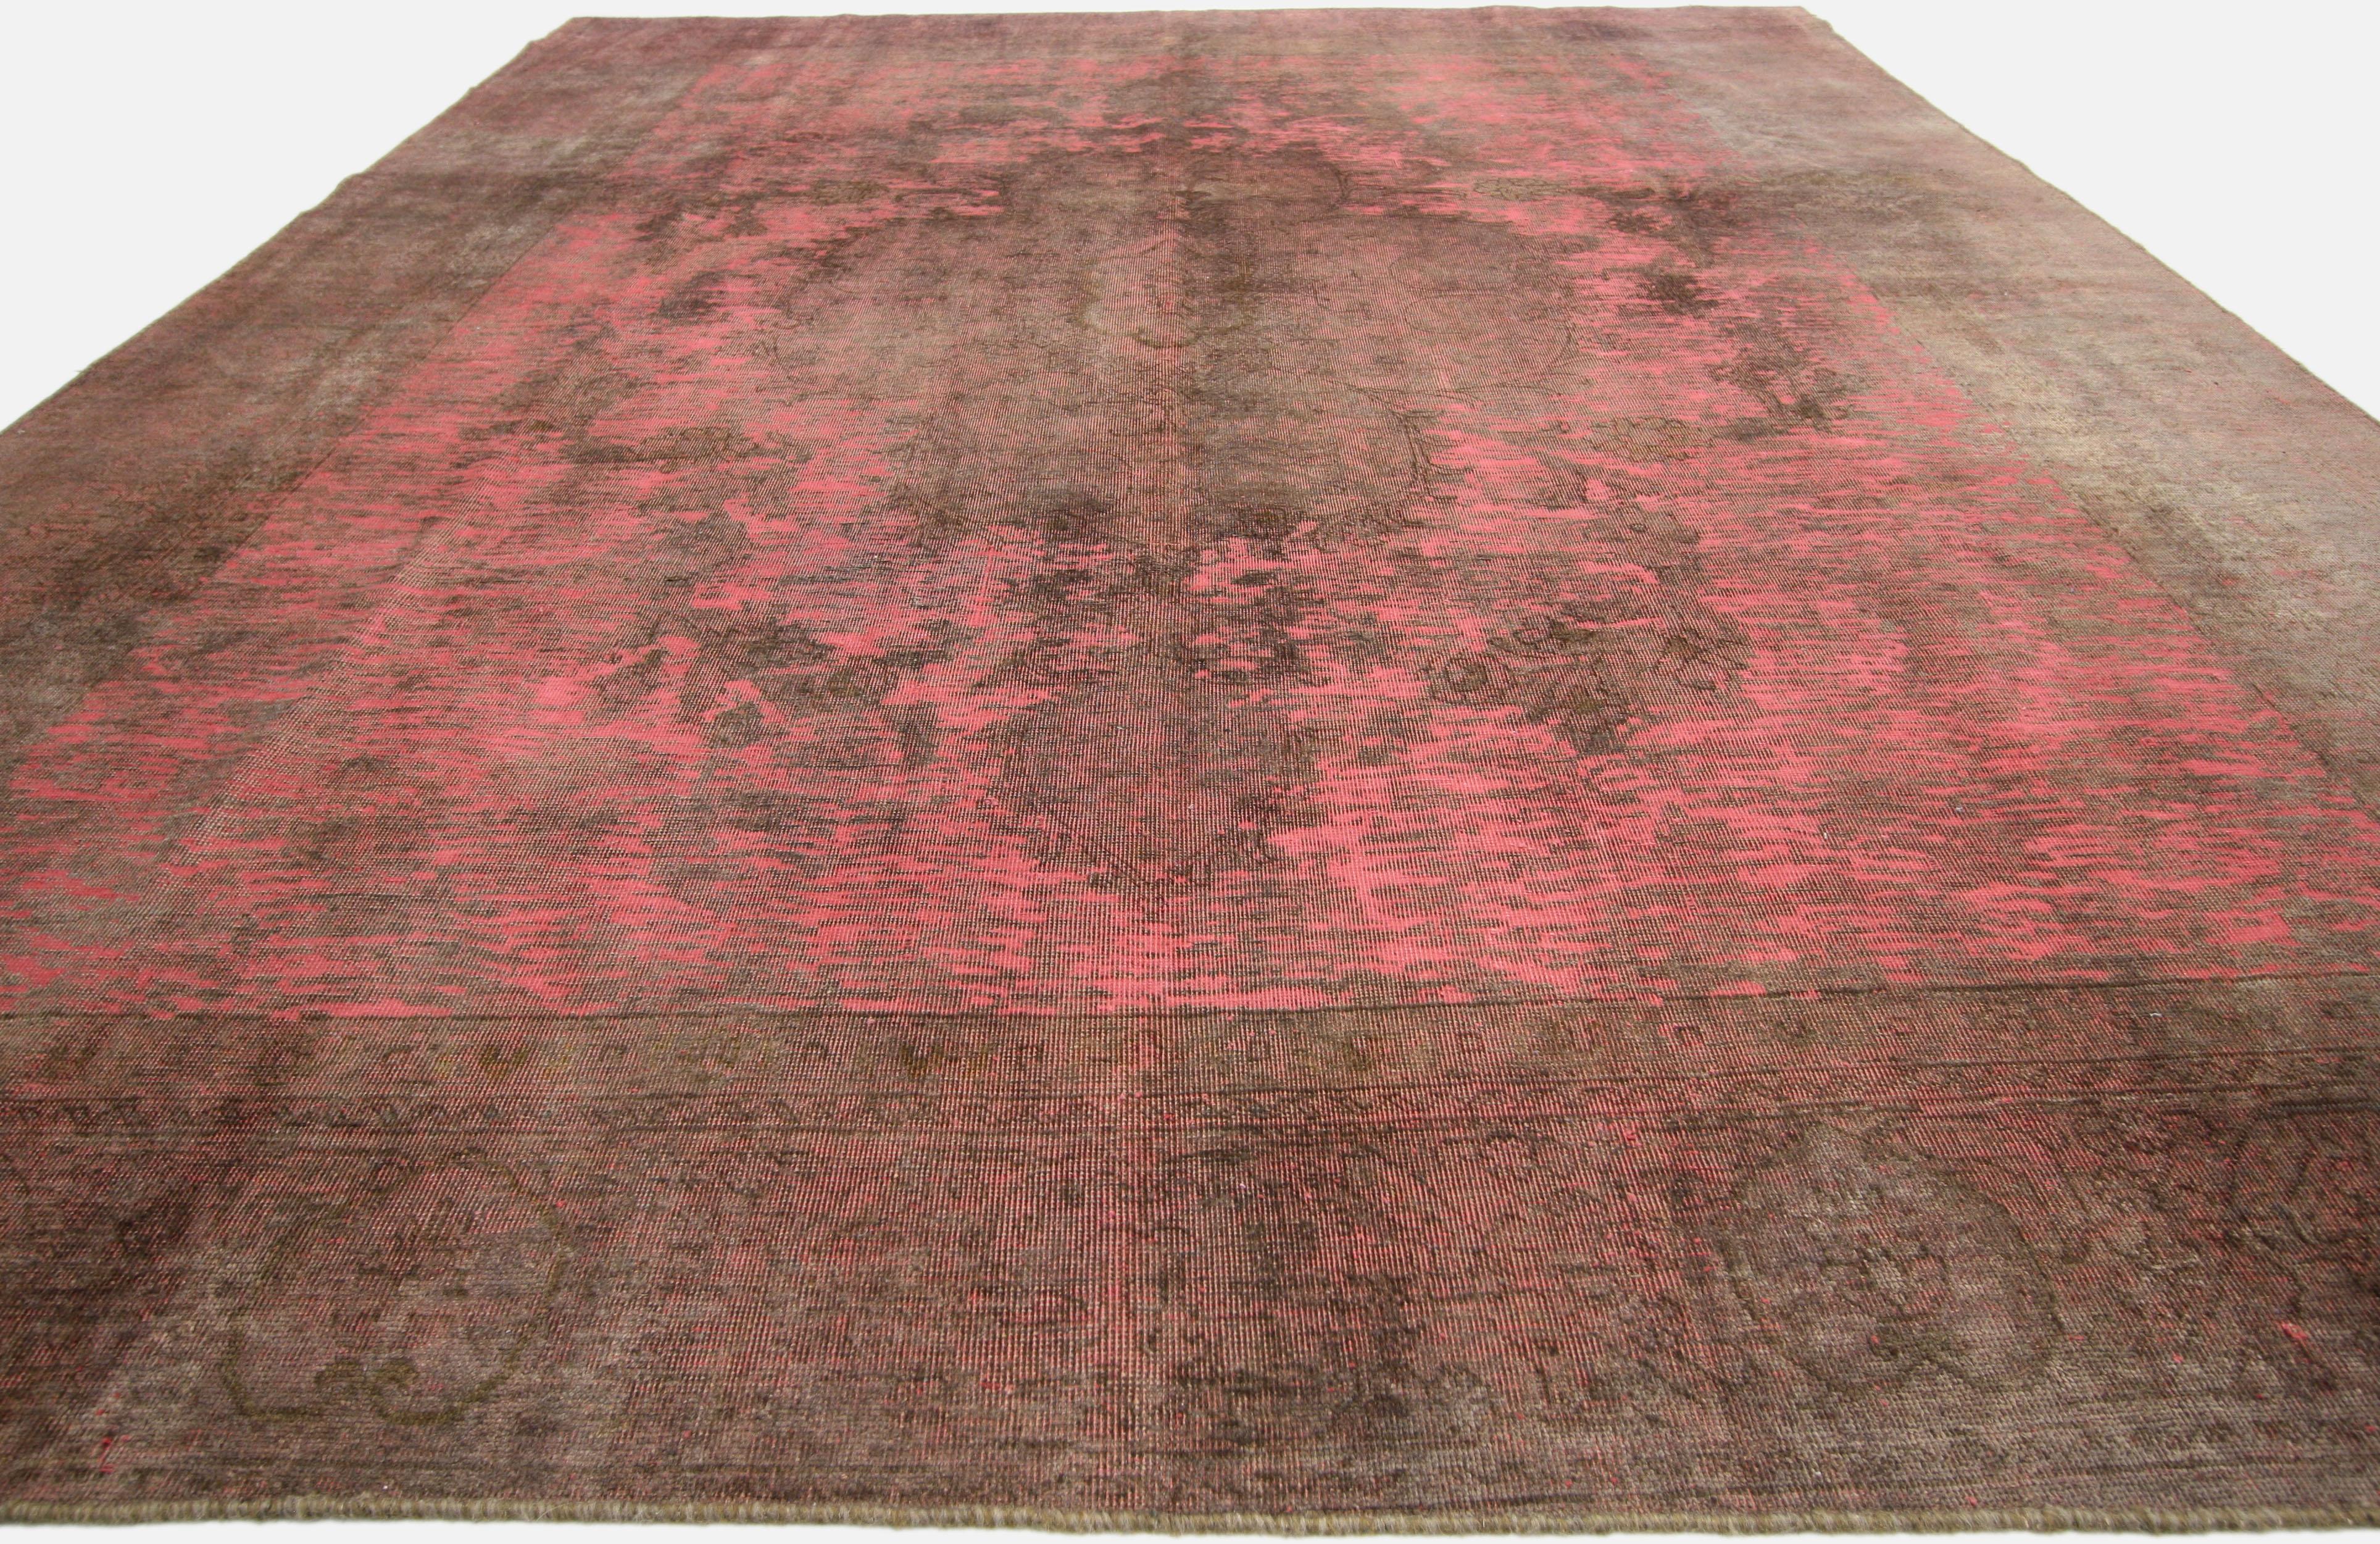 60723 Vintage Turkish Overdyed Rug, 09'09 x 12'05.
Modern Industrial meets Bohemian Rhapsody in this hand knotted wool vintage Turkish overdyed rug. The eclectic faded design and energetic color palette in this piece work together capturing the